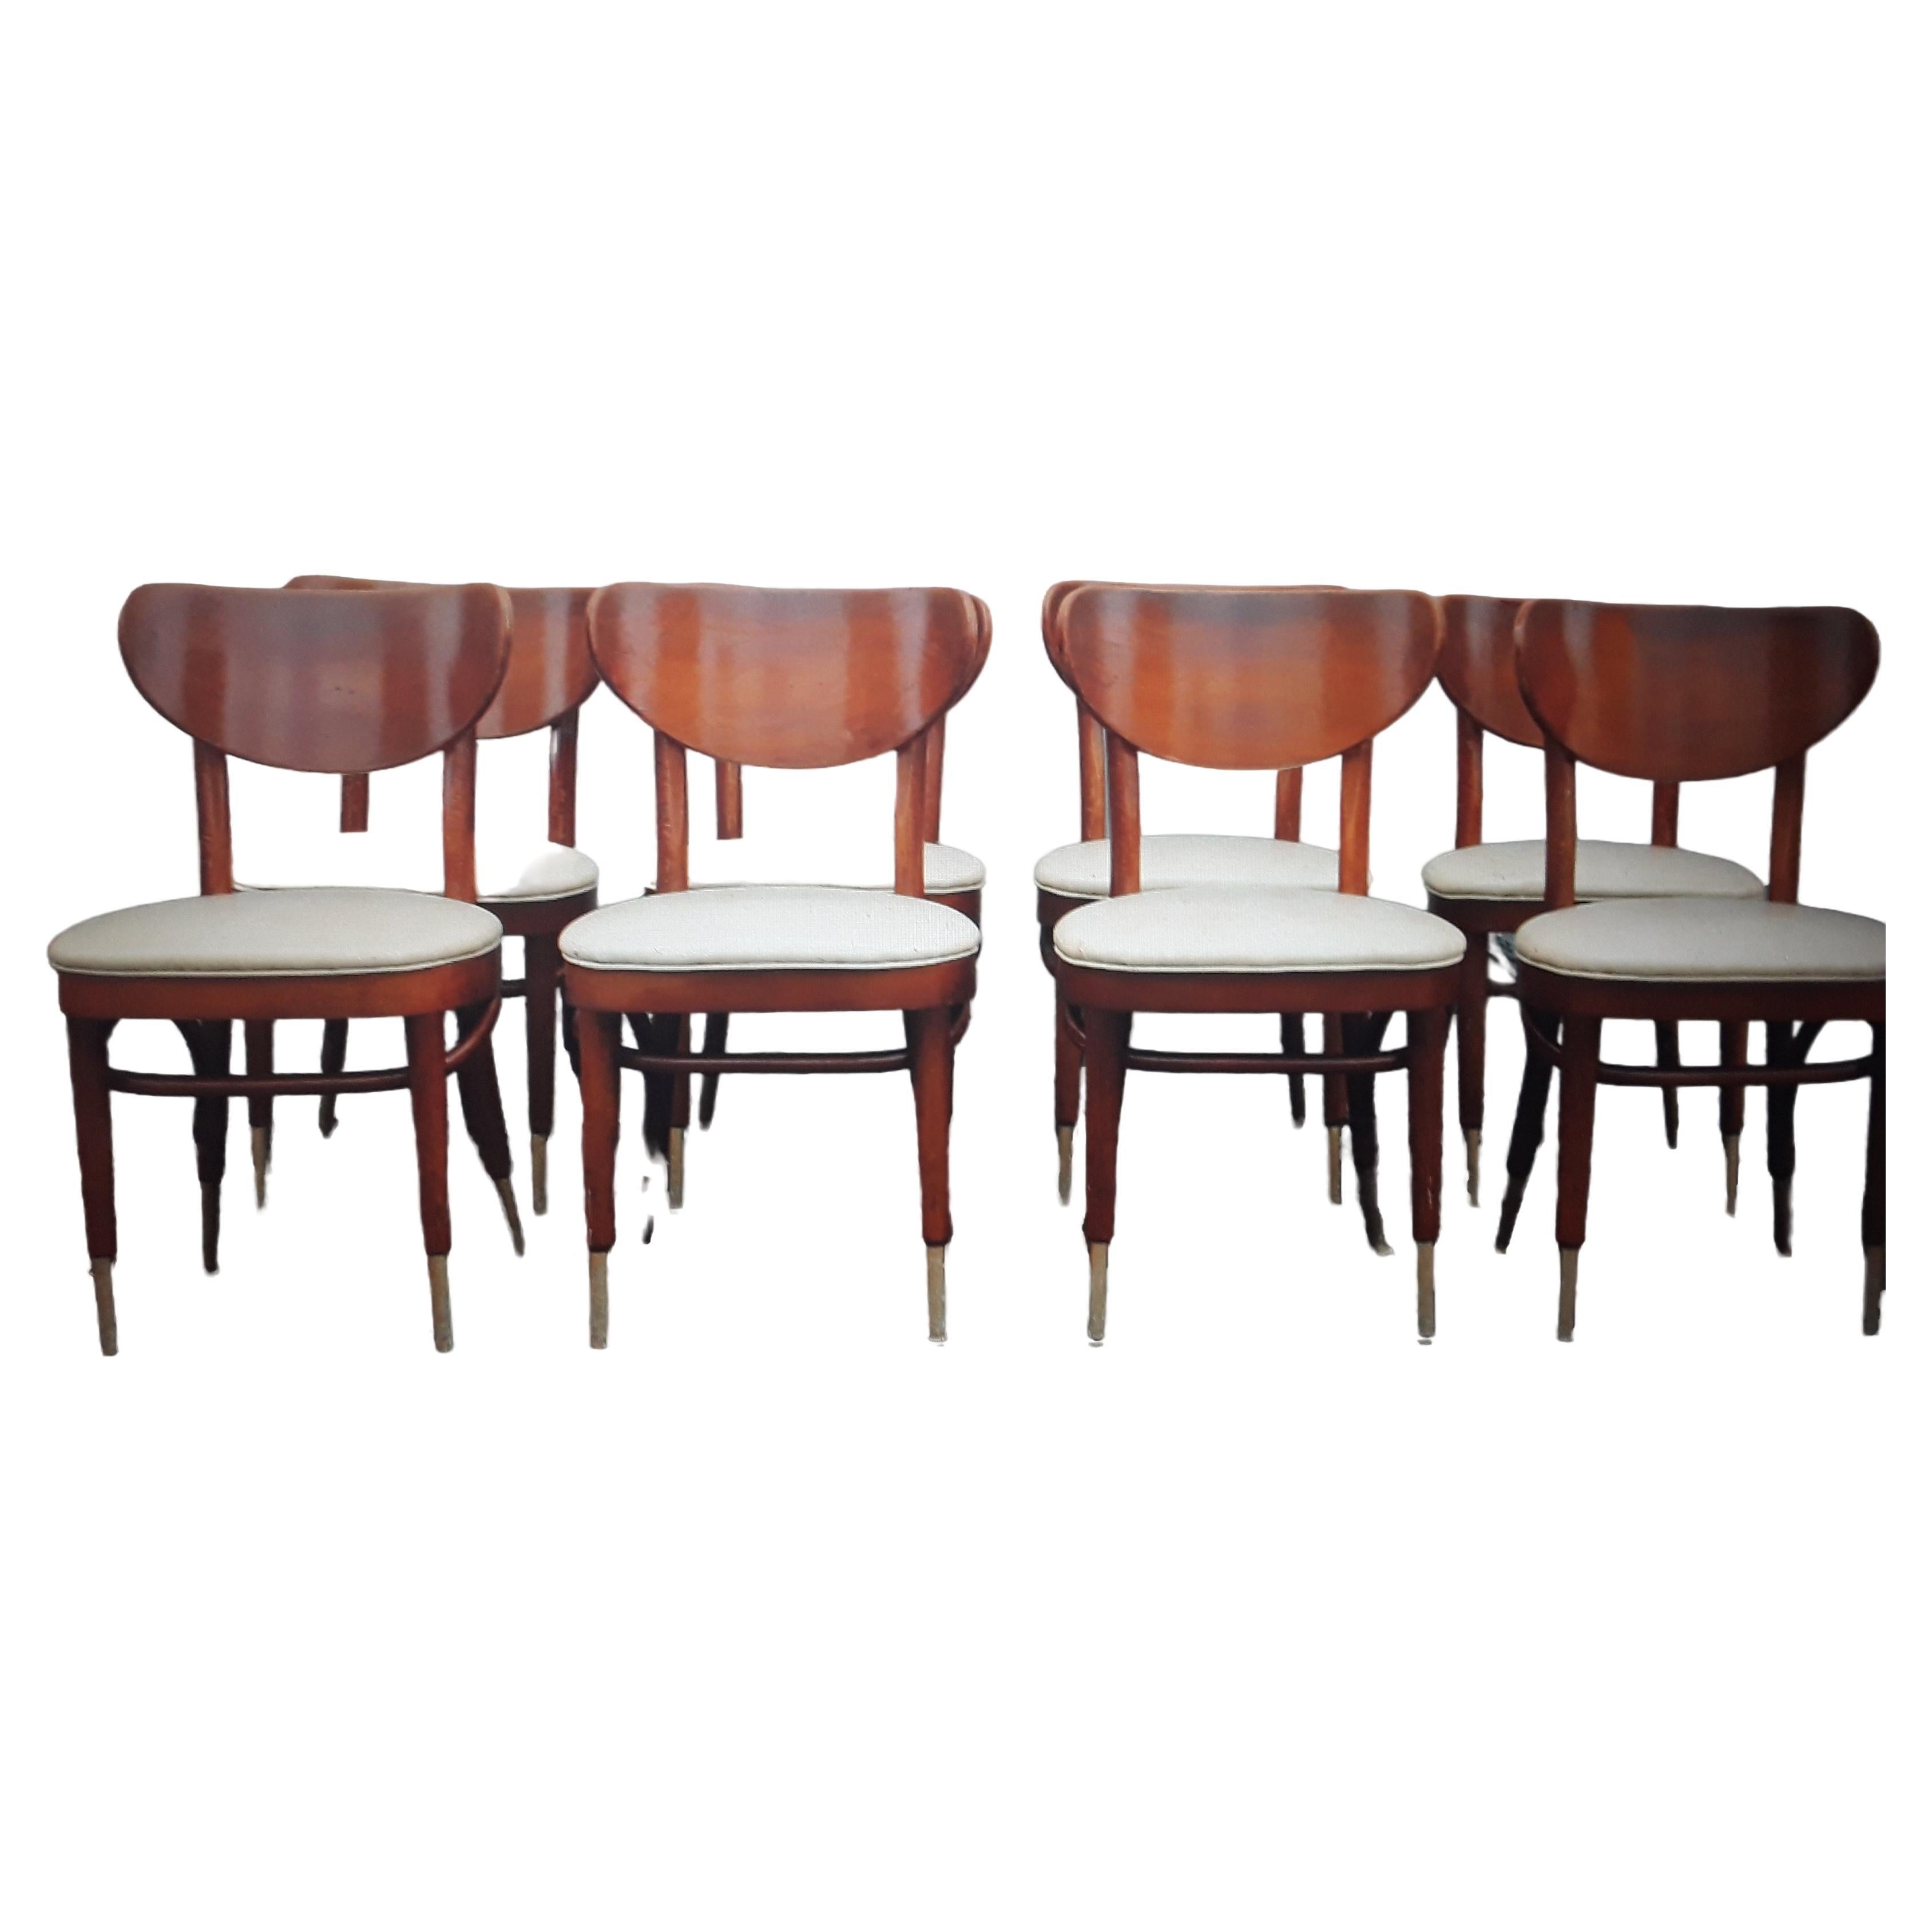 Set of 6 Mid Century Modern "George Jetson" style Bent Wood Dining Chairs For Sale